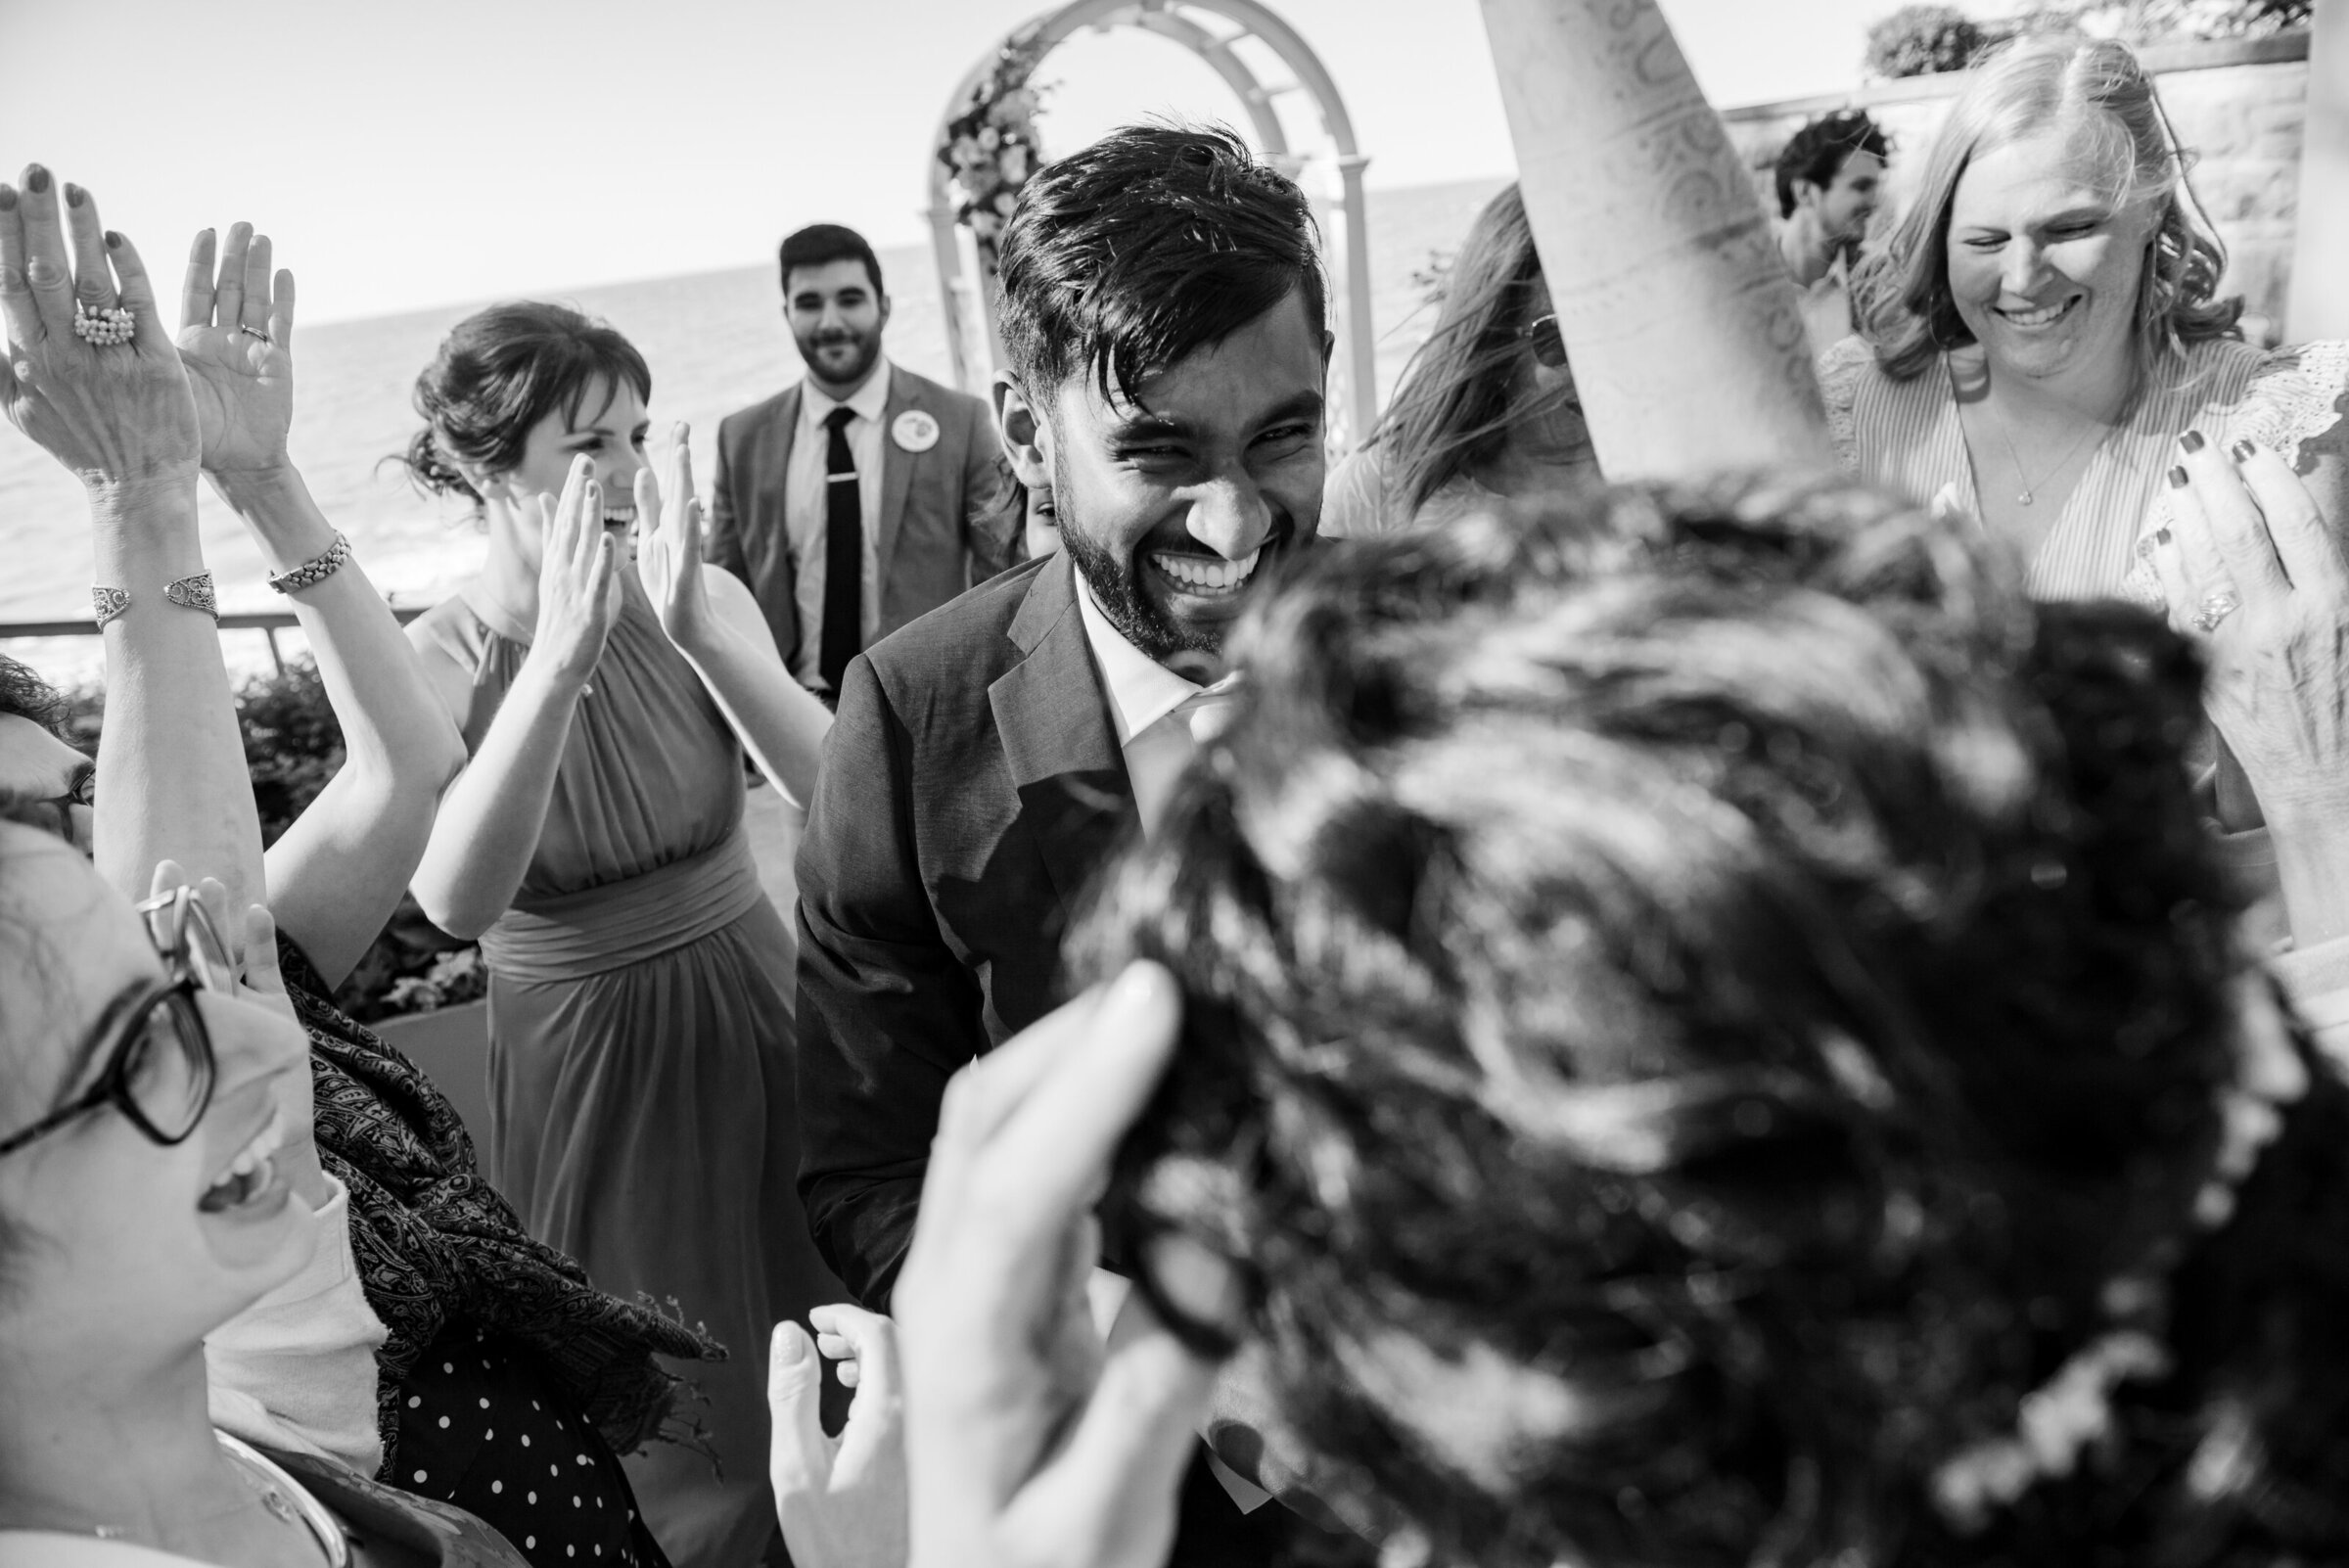 Ohio groom shares a dance with his bride on their wedding day, surrounding by all their friends and family during a private lakeside wedding in Ohio. Photo taken by Cincinnati wedding photographer Aaron Aldhizer